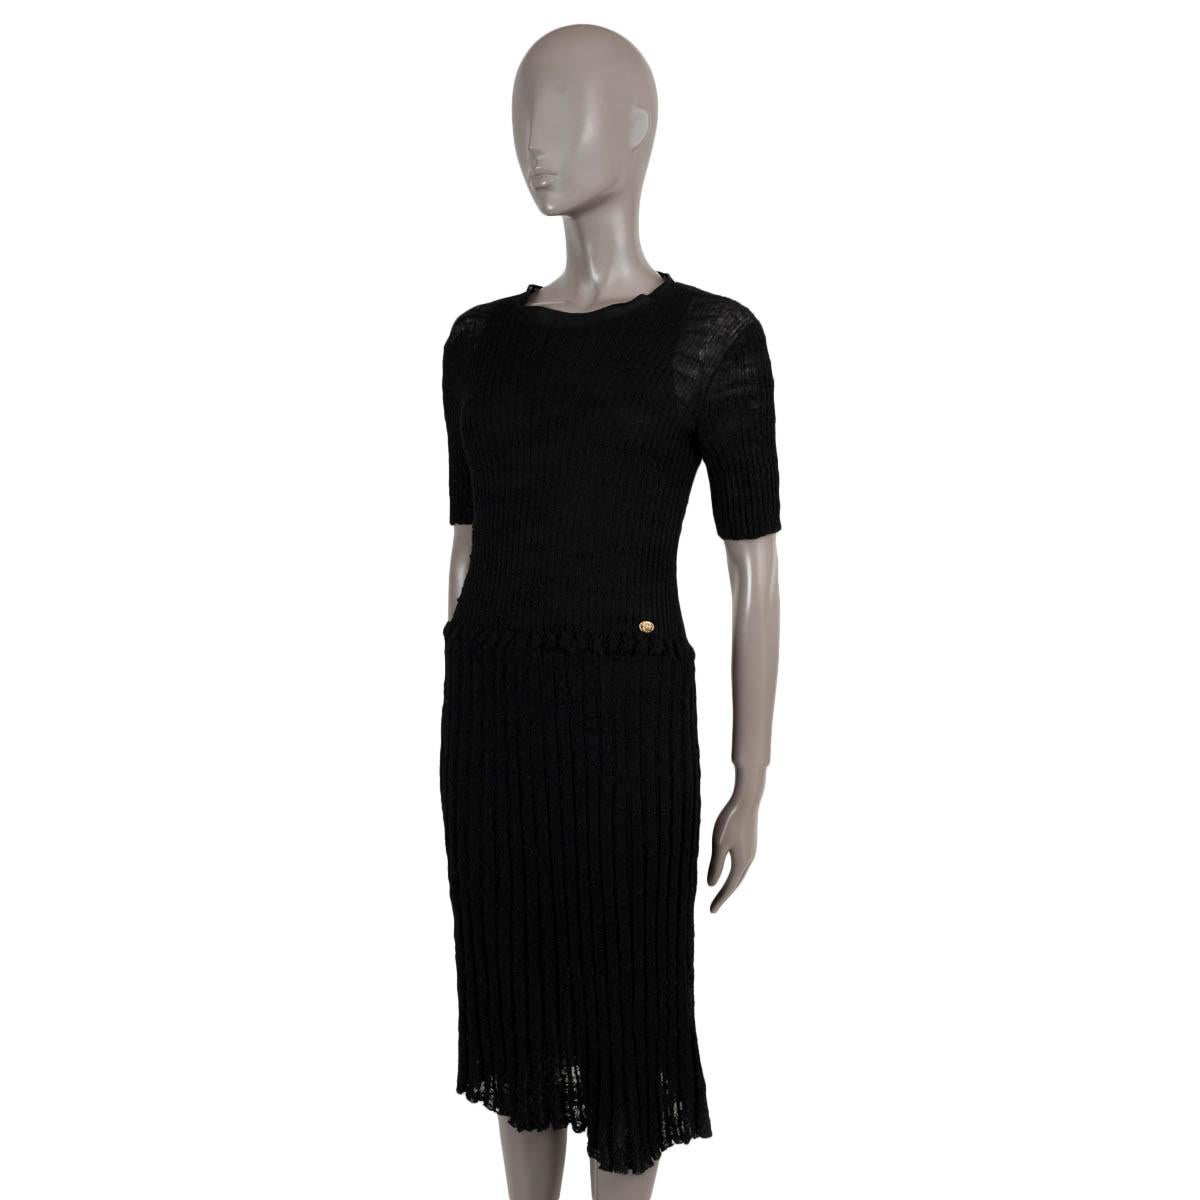 100% authentic Chanel semi-sheer knit midi dress in black textured rib-knit alpaca (48%), nylon (32%) and linen (20%). Features a round neck, short sleeves and drop waist with gold-tone button. Comes with silk slip dress. Has been worn and is in